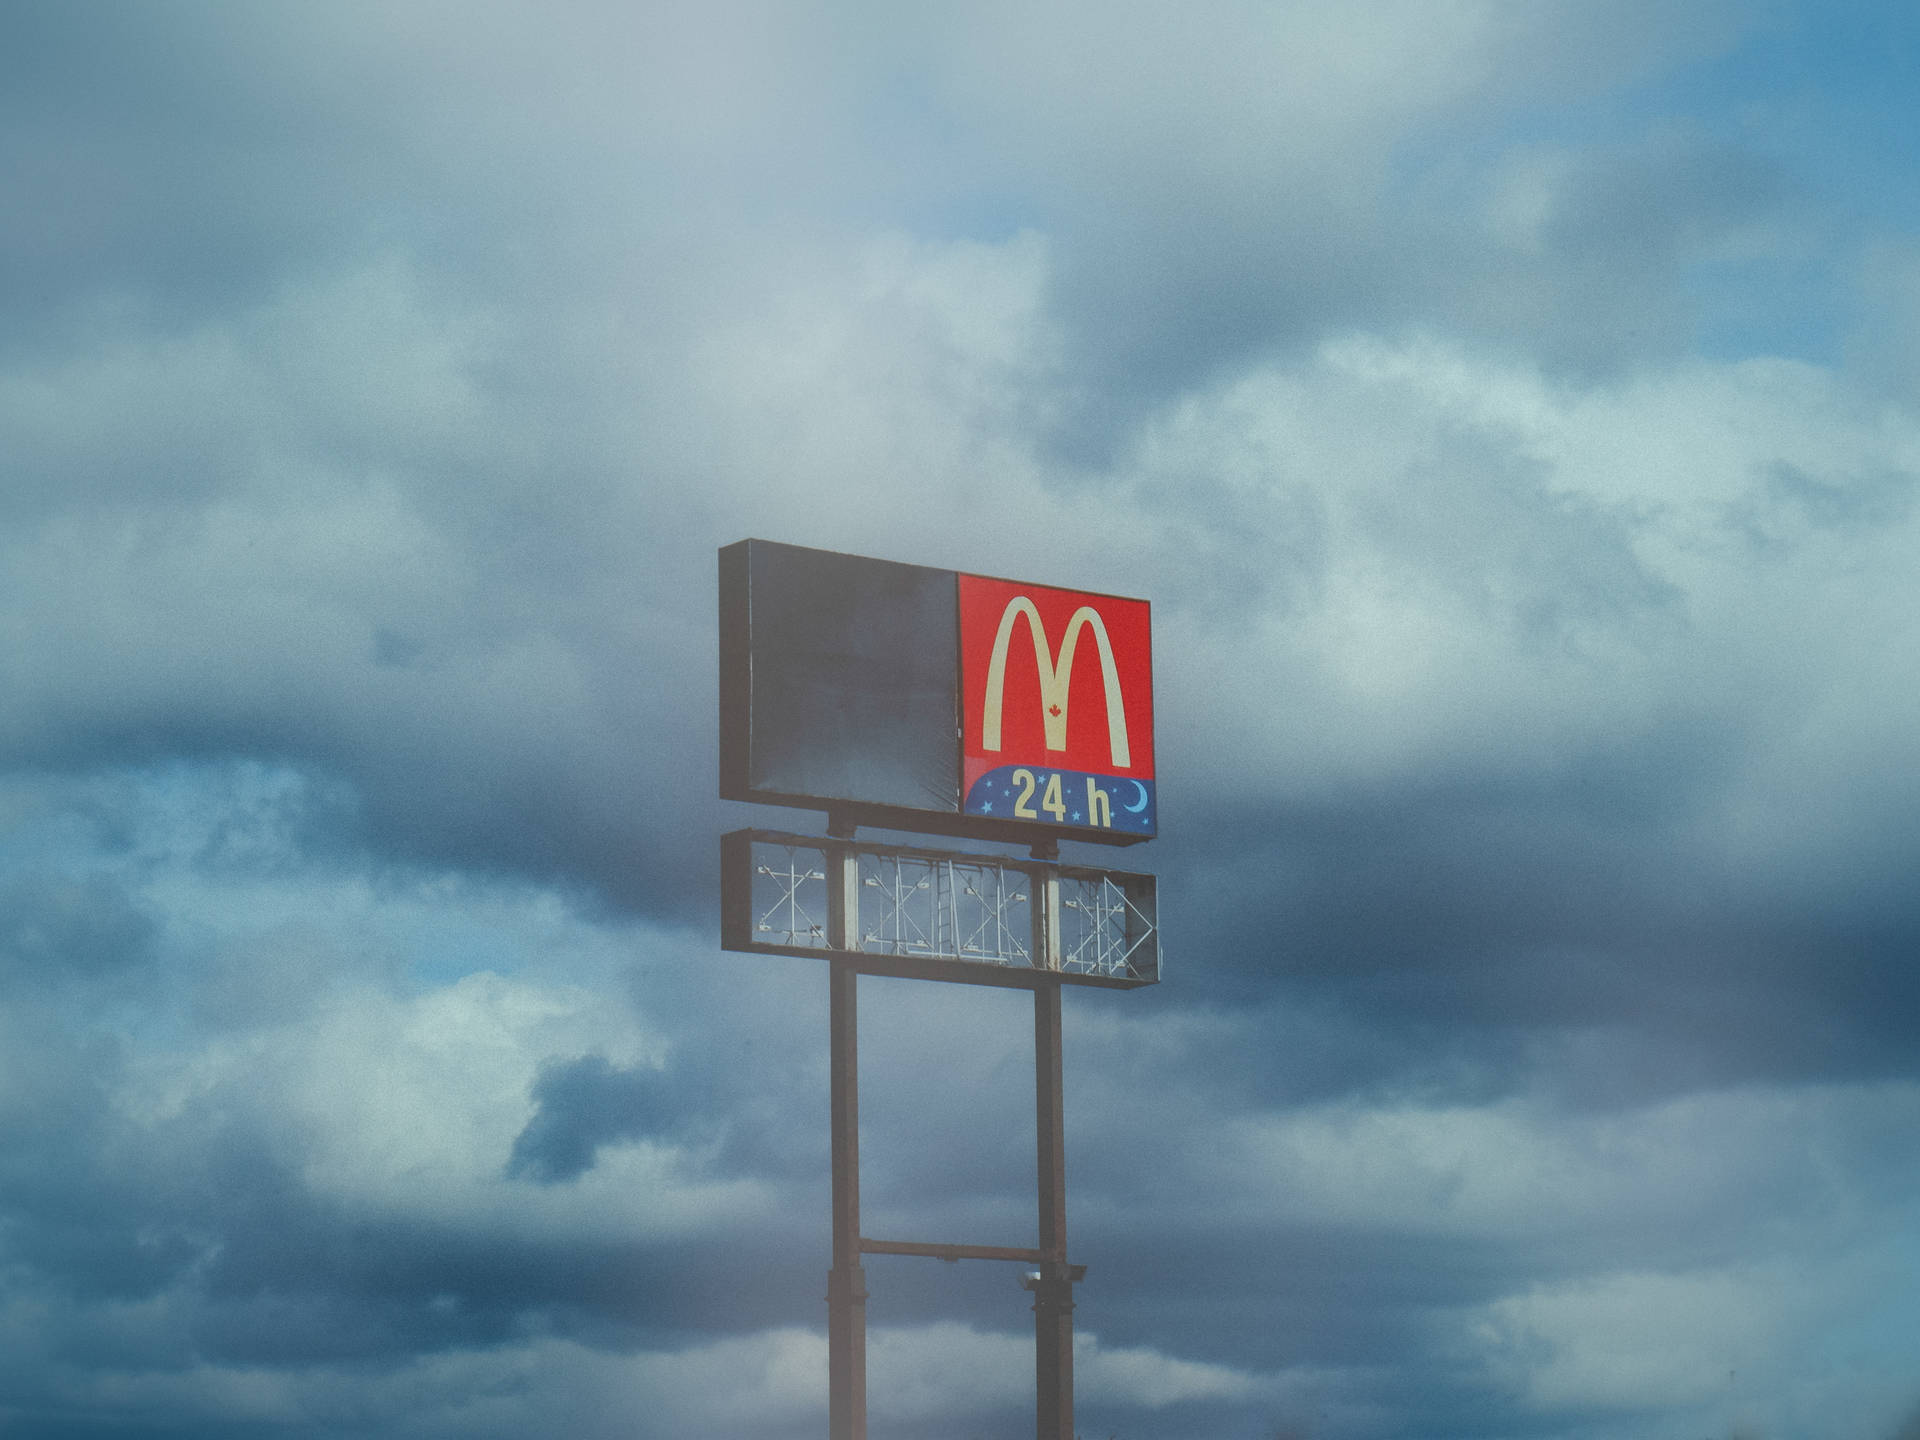 Cloud Aesthetic With Mcdonald's Signage Wallpaper